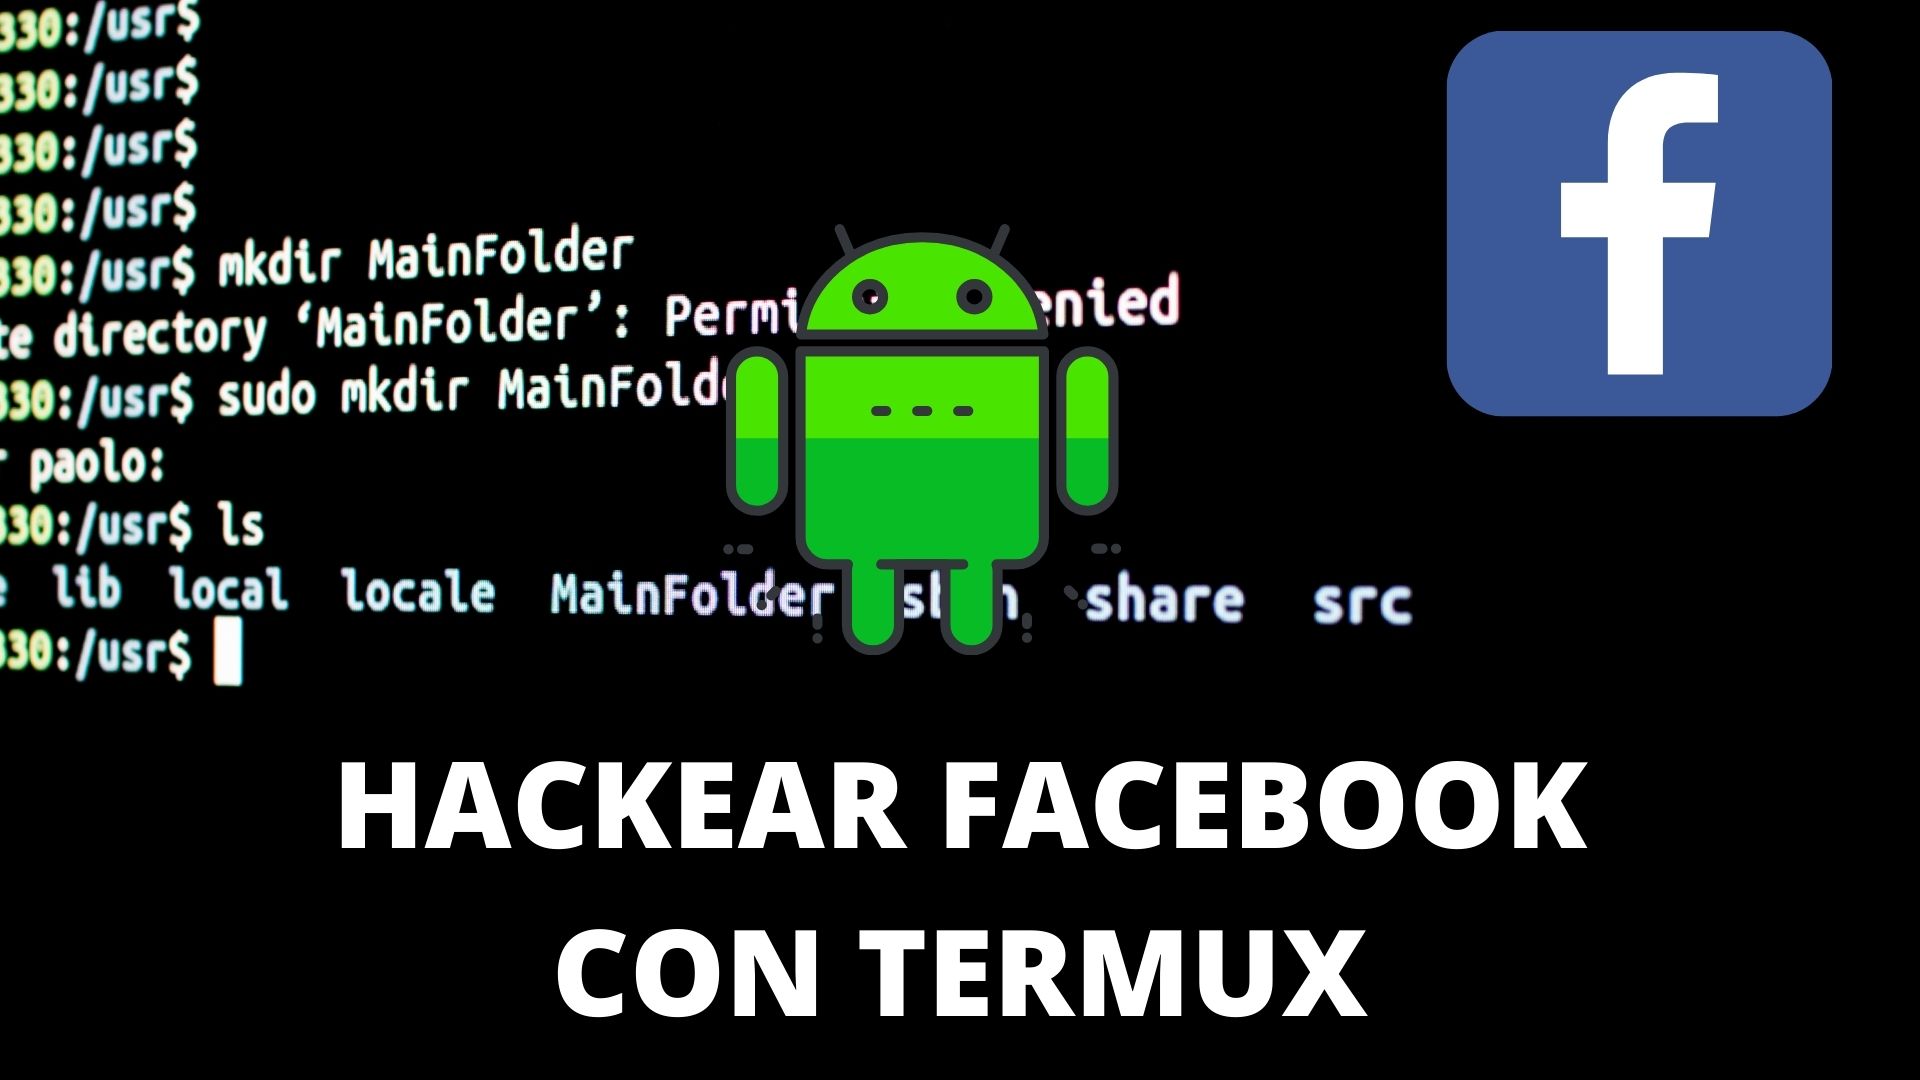 commands to hack facebook with termux